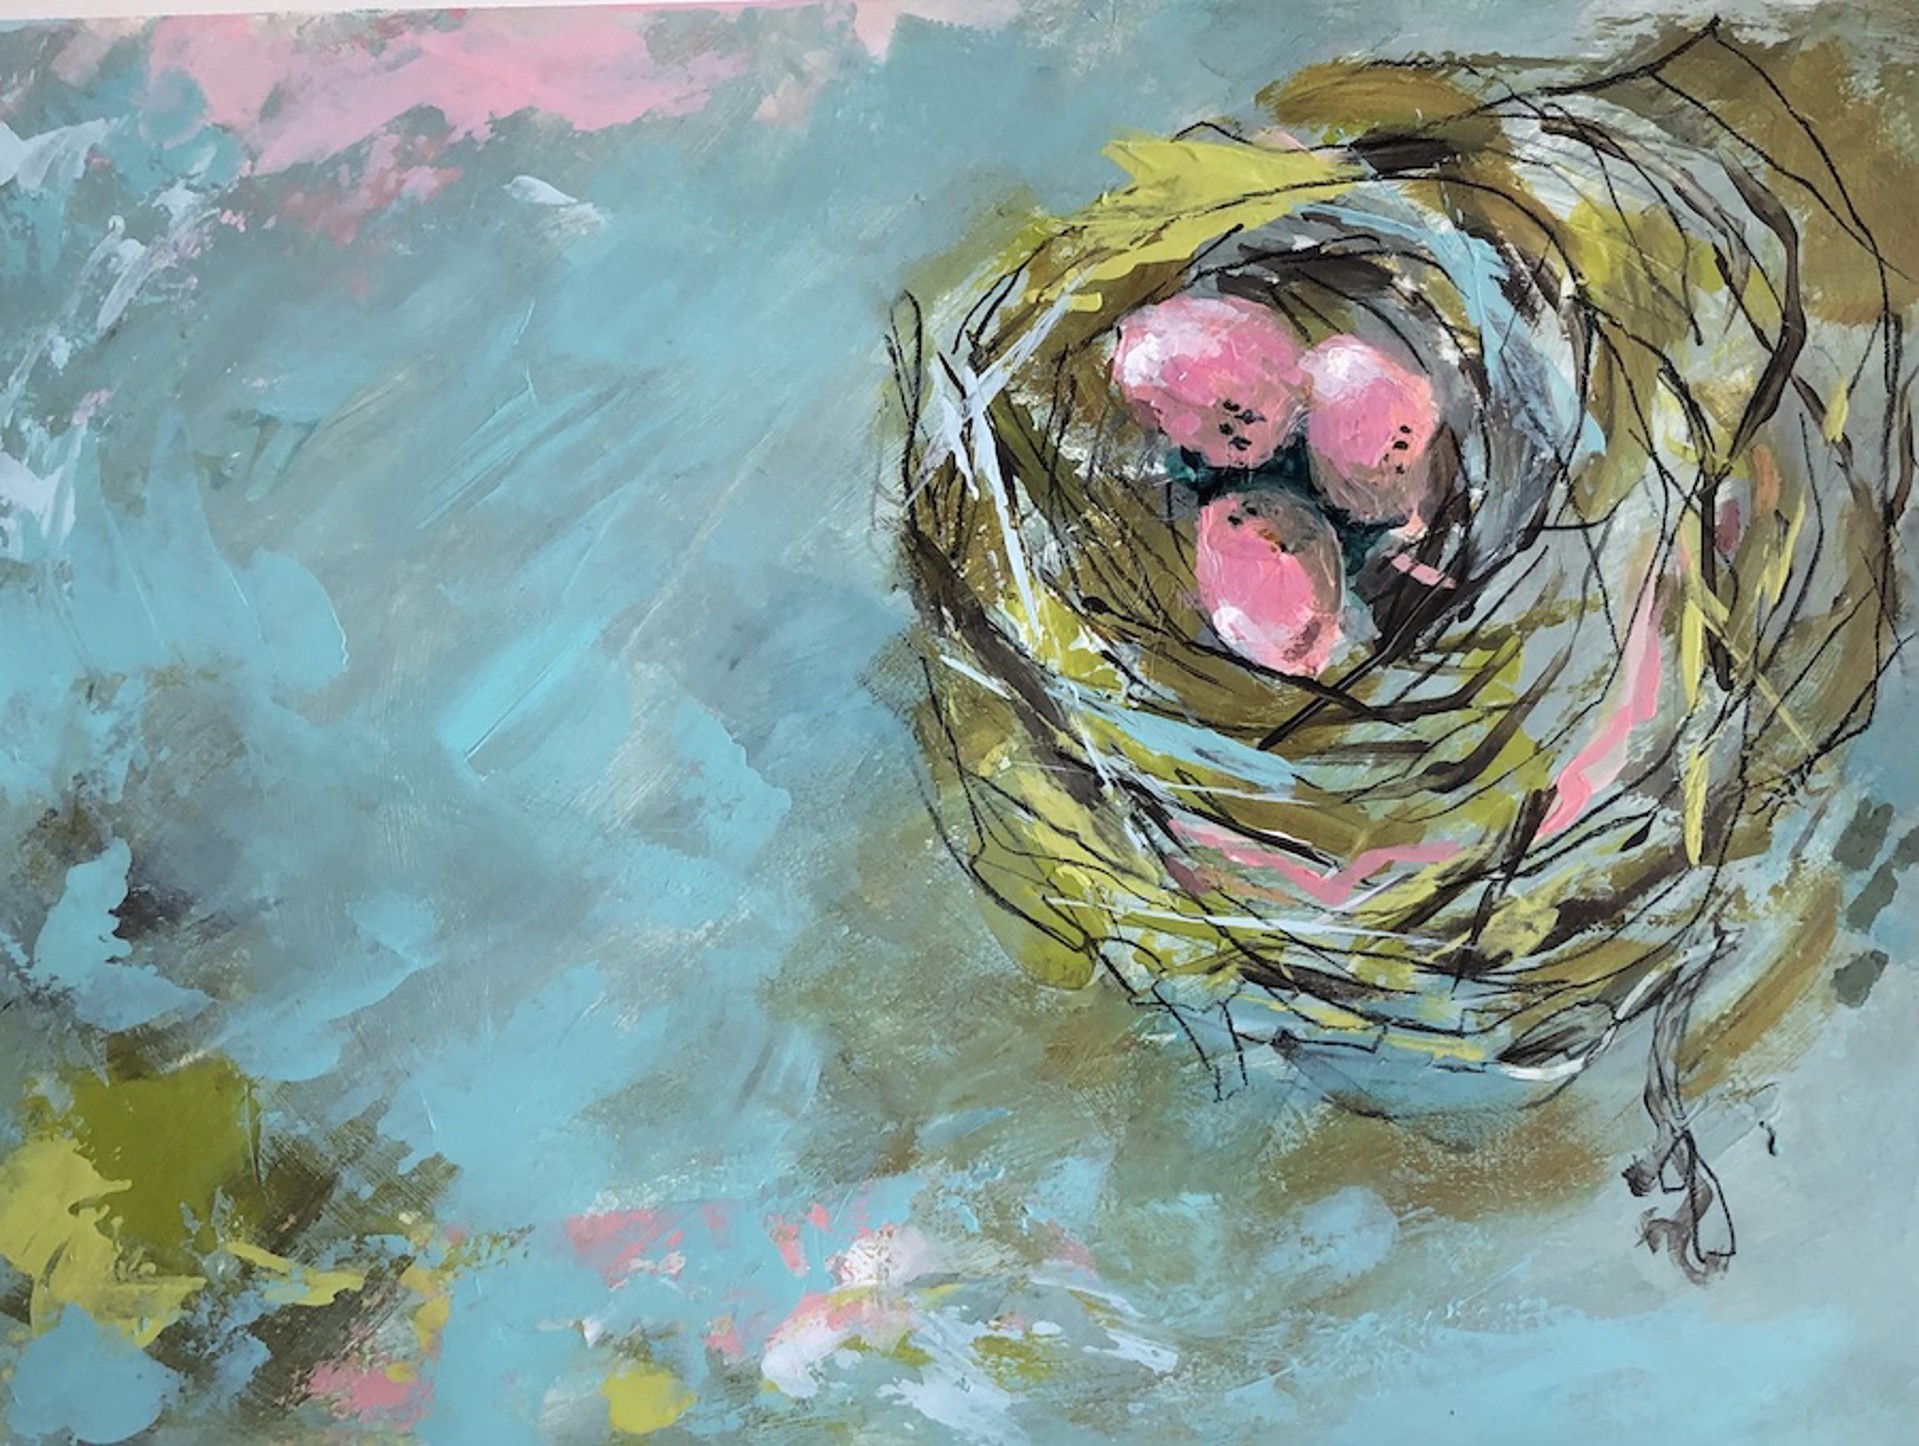 Nesting by Sue Grilli